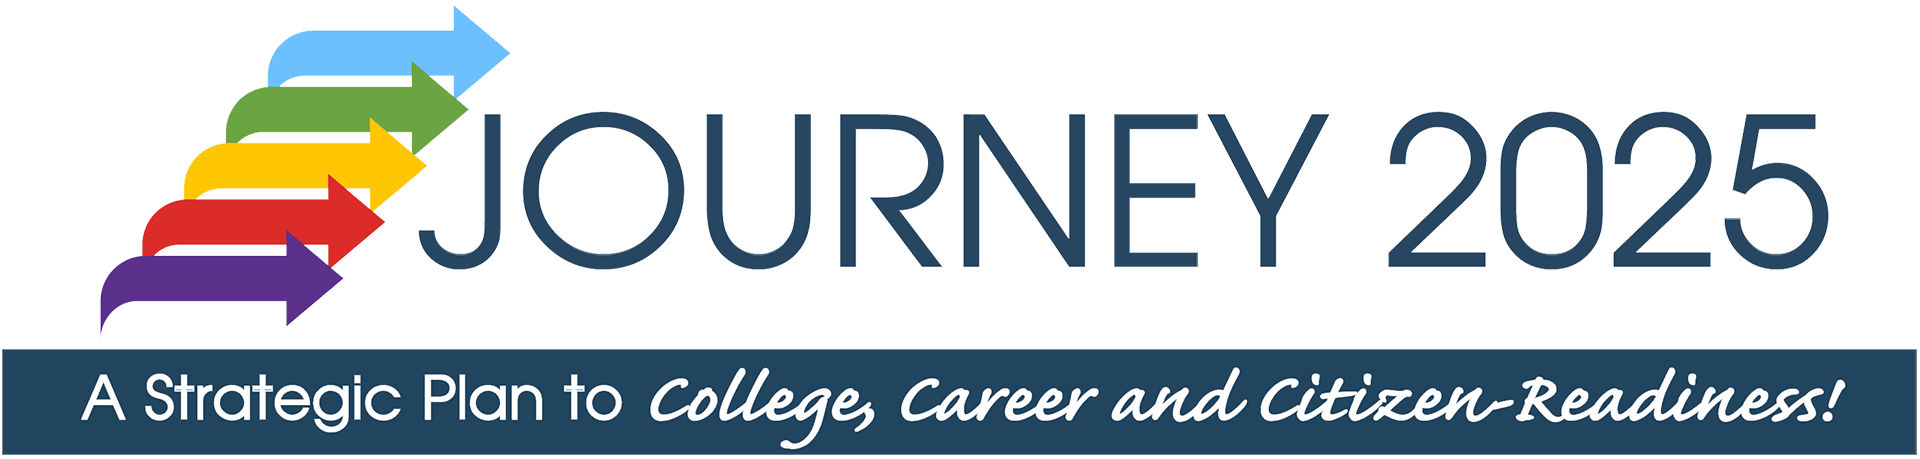 Journey 2020: A Strategic Plan to College, Career and Citizen-Readiness